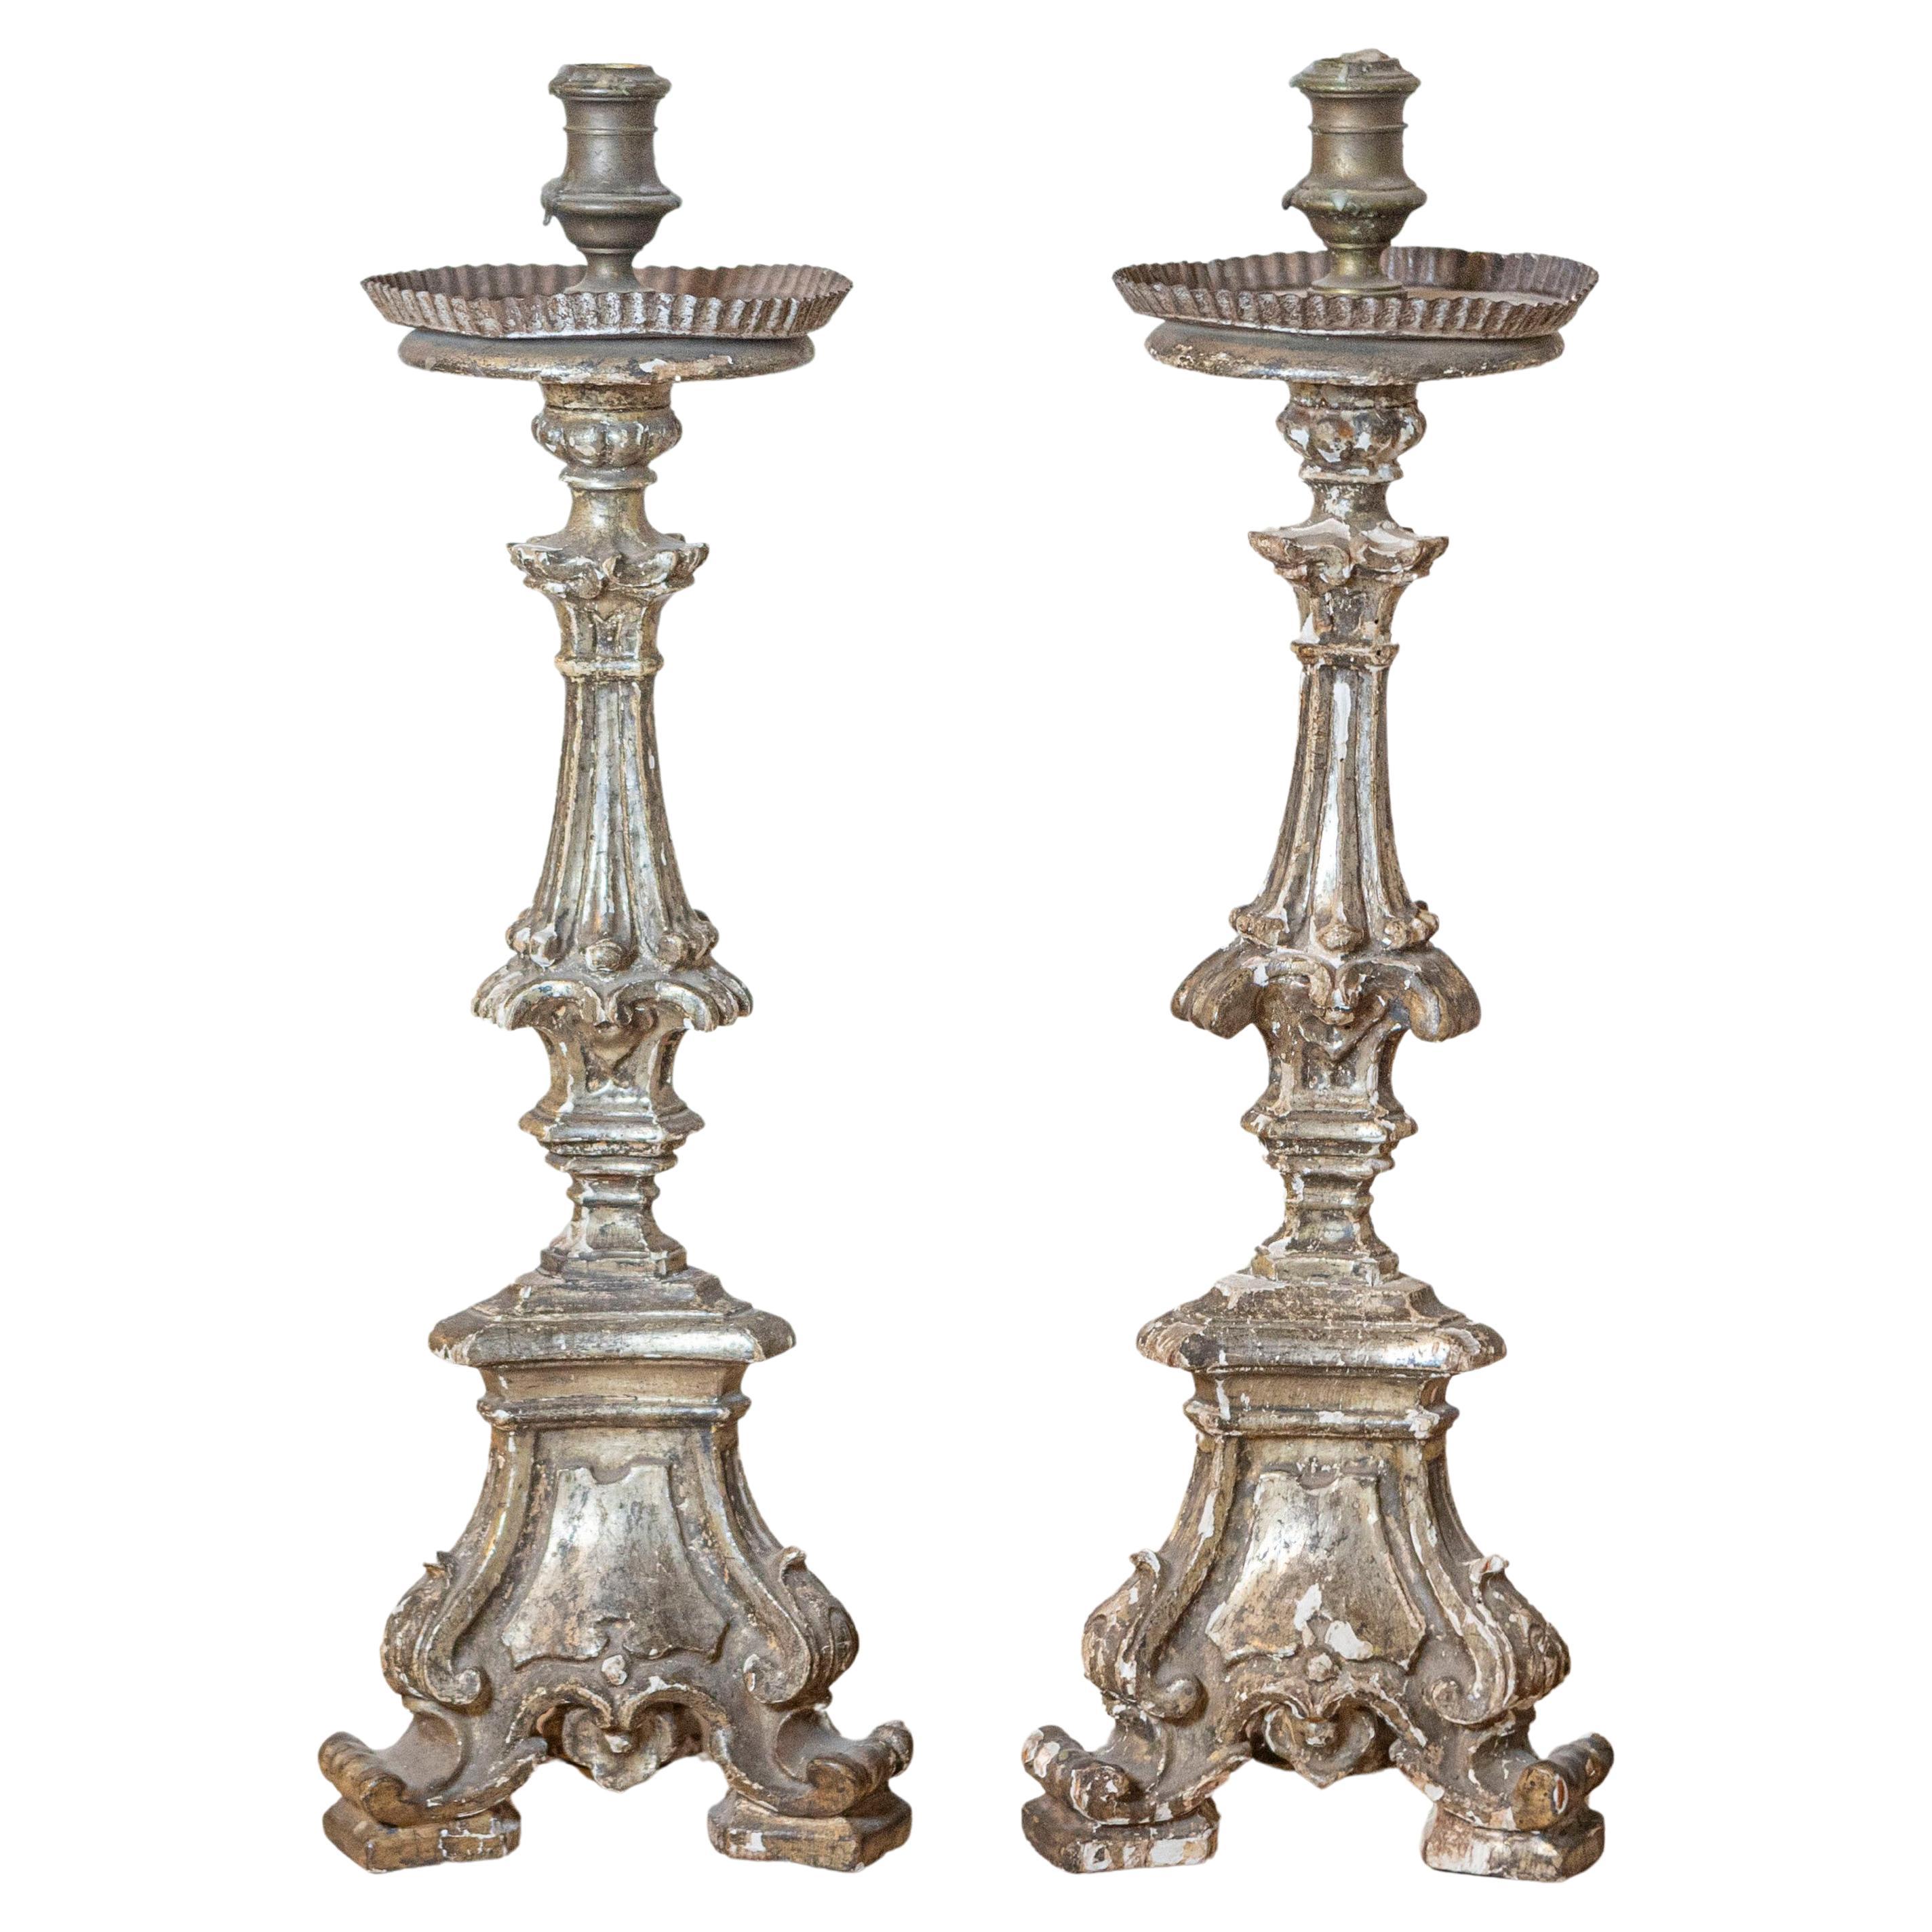 Pair of Rococo Period 18th Century Italian Painted and Carved Candlesticks